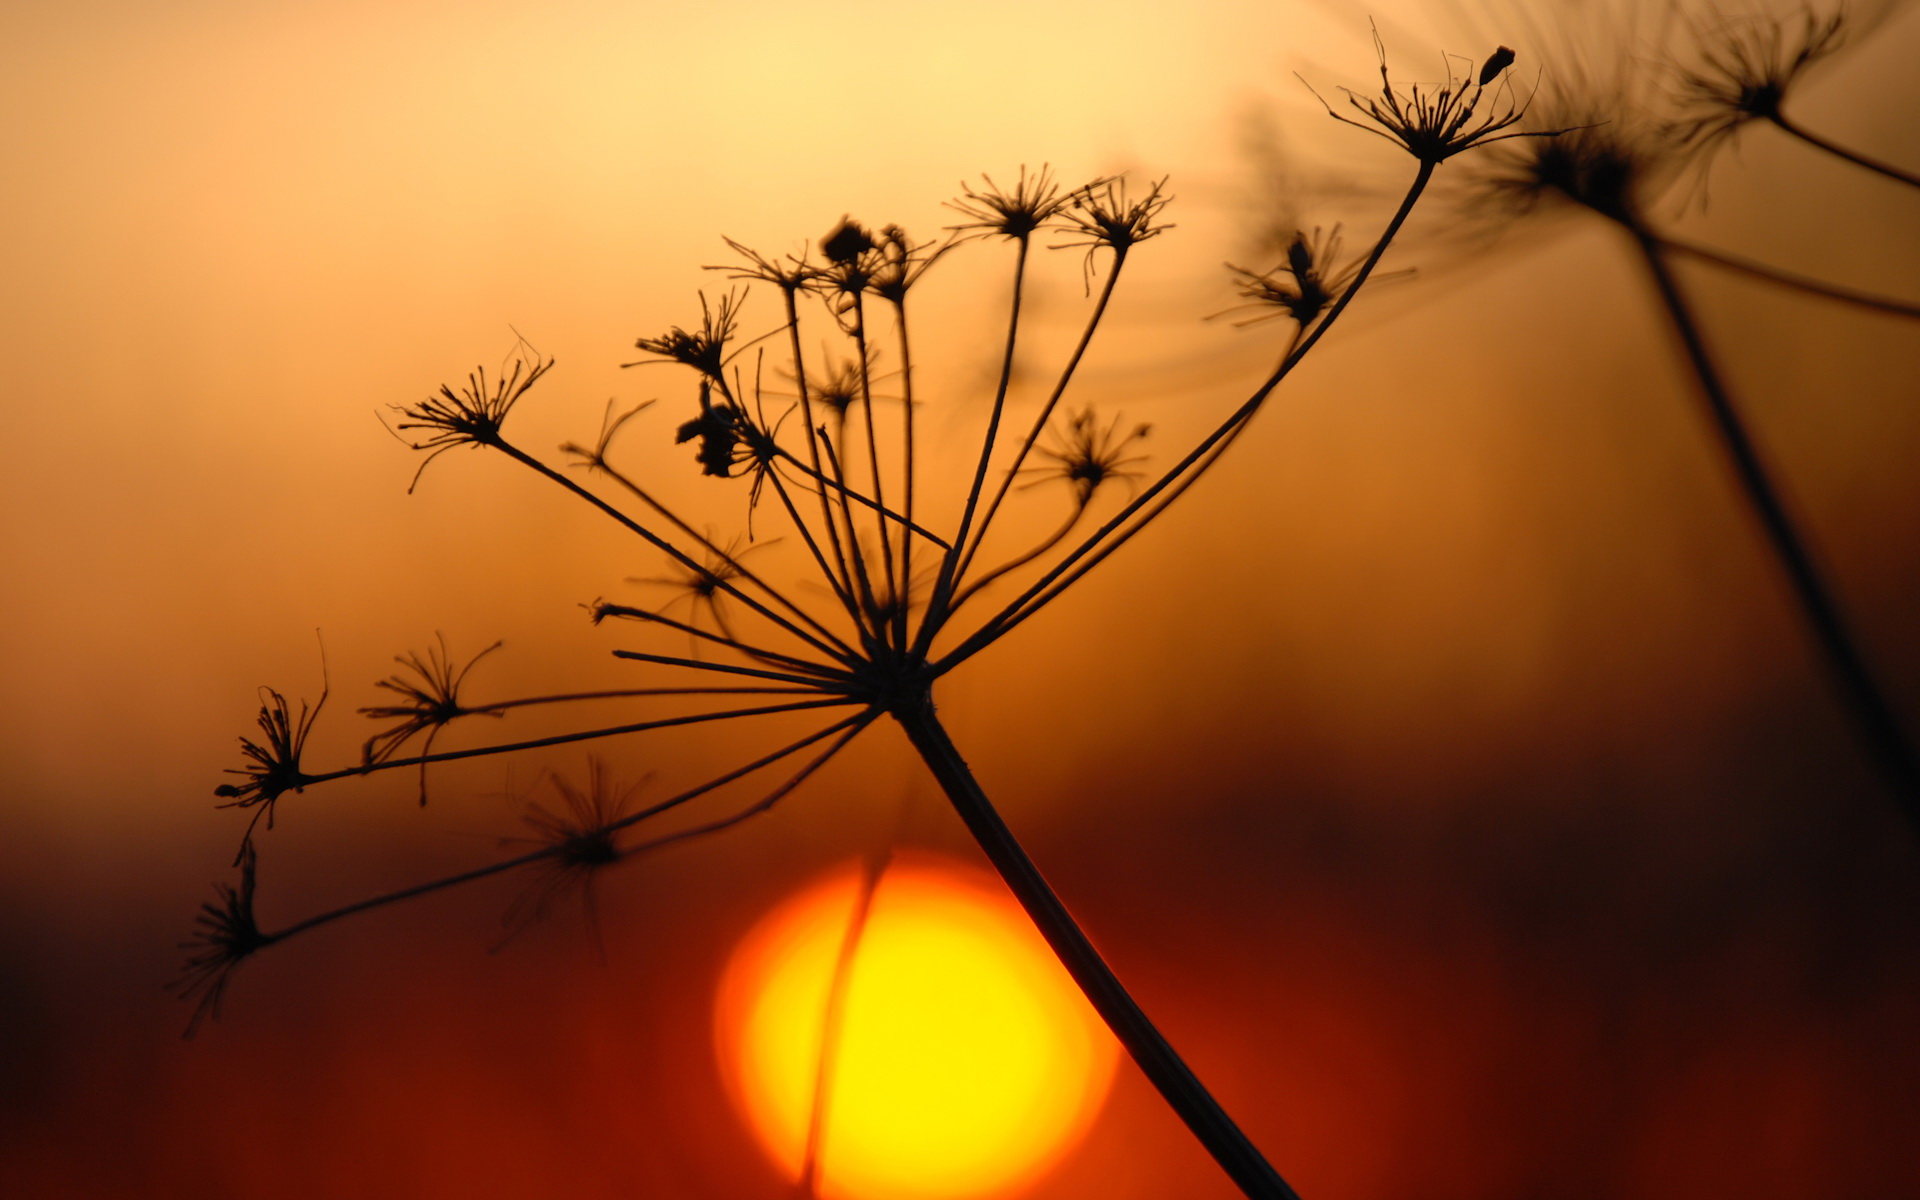 Plant and sunset wallpapers | Plant and sunset stock photos